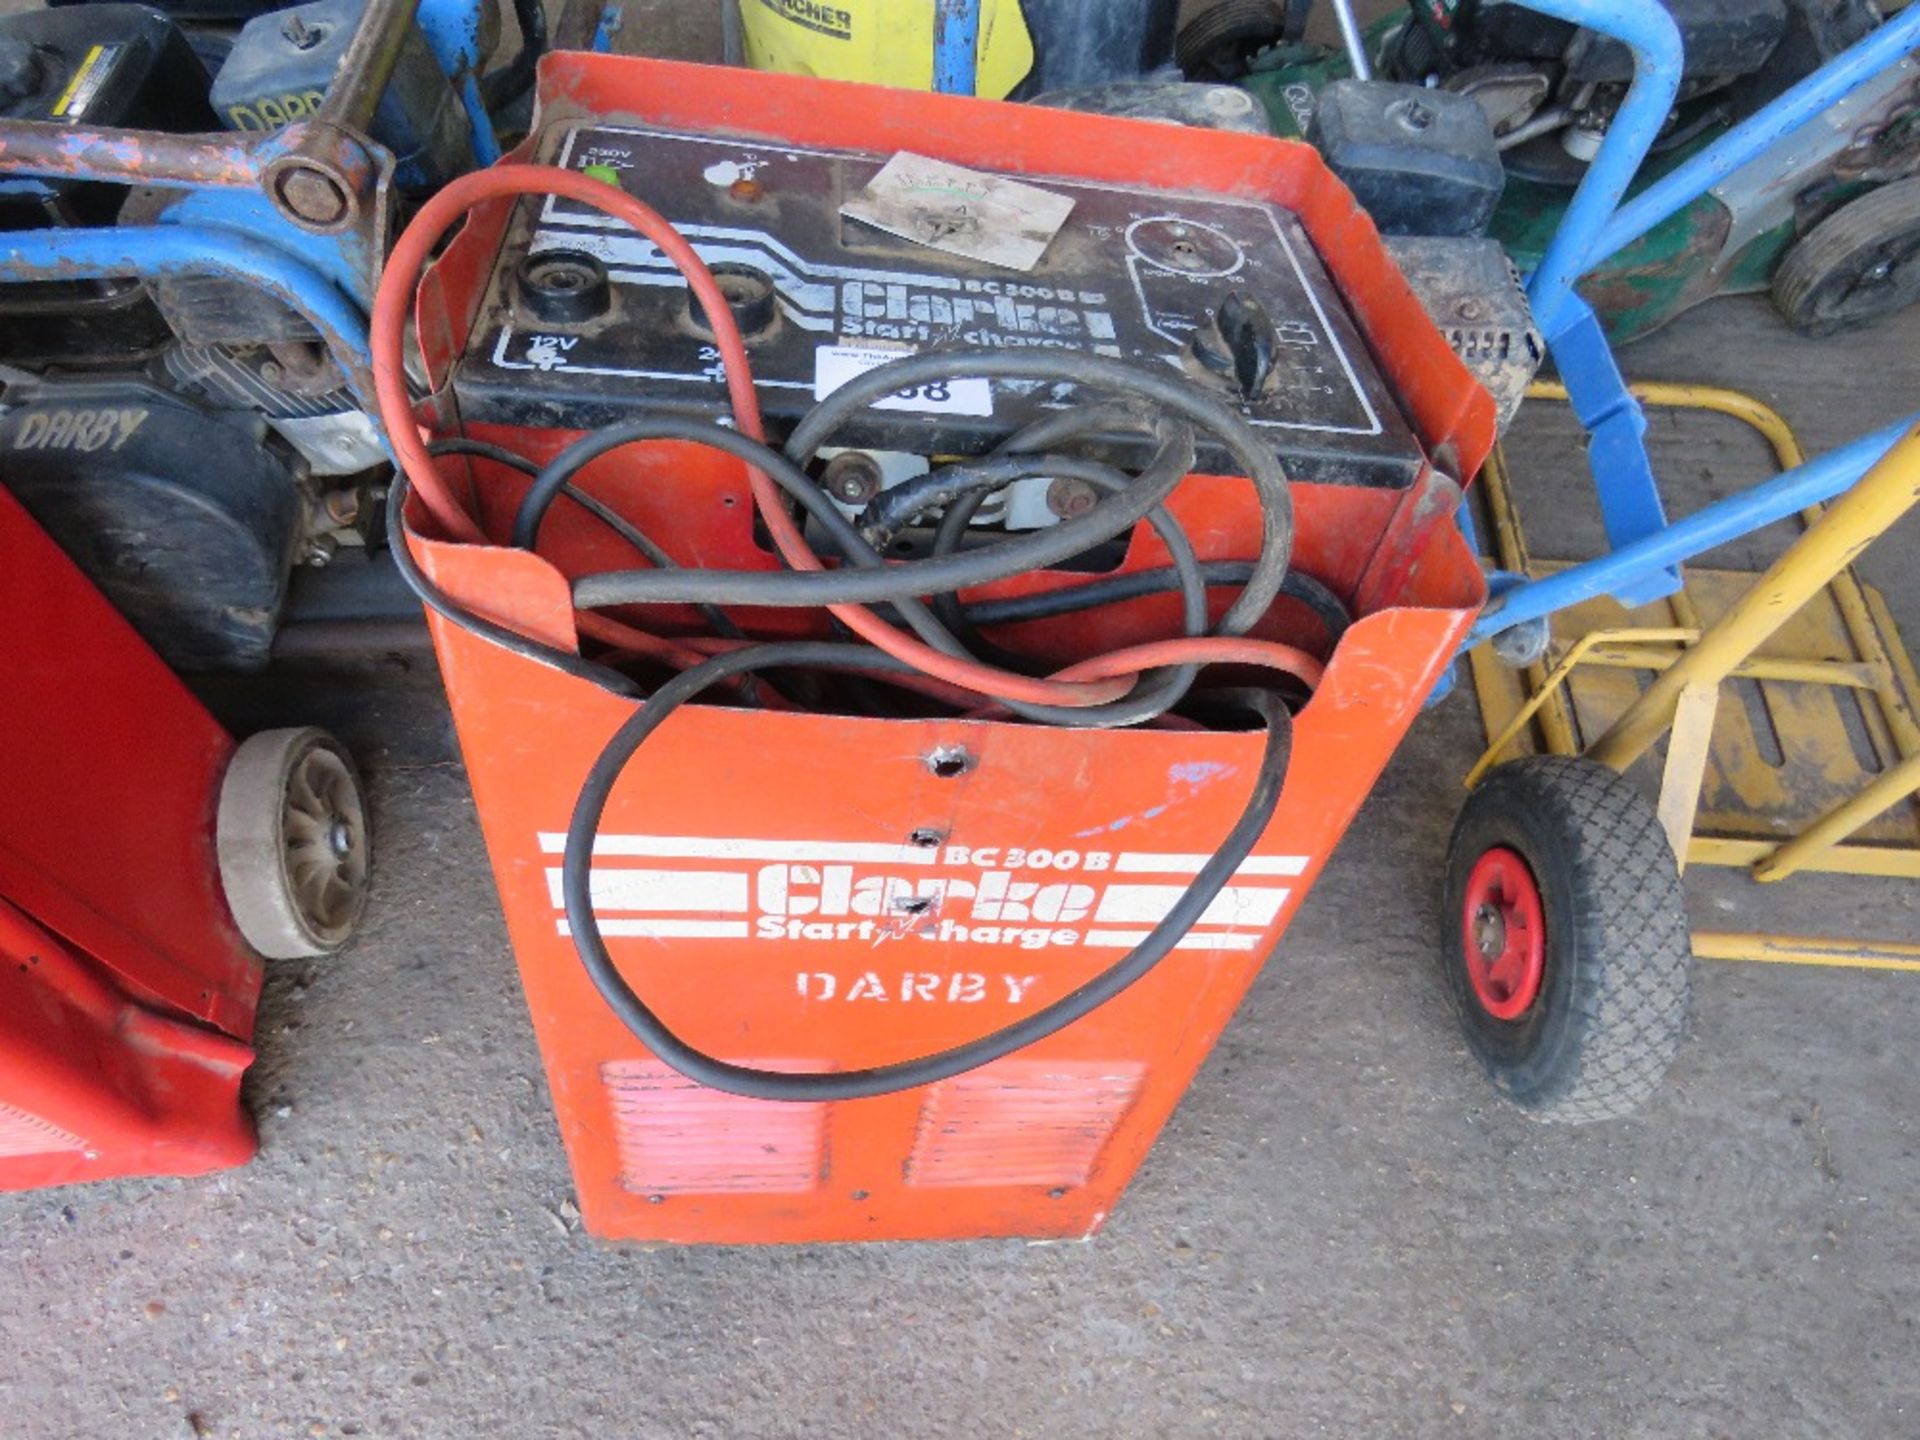 BATTERY CHARGER. DIRECT FROM A LOCAL GROUNDWORKS COMPANY AS PART OF THEIR RESTRUCTURING PROGRAMM